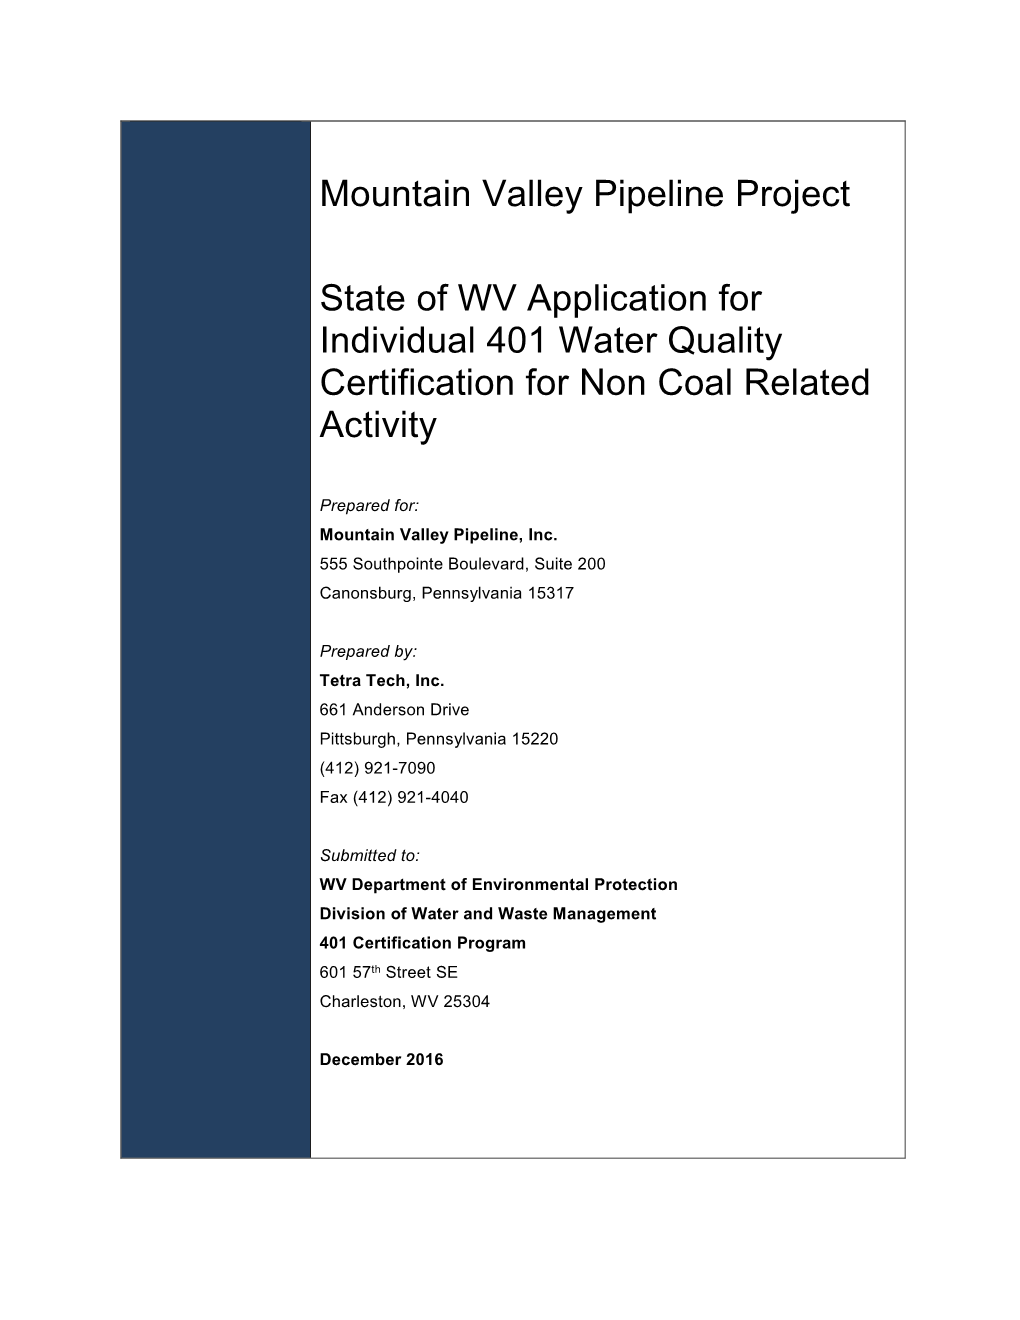 Mountain Valley Pipeline Project State of WV Application for Individual